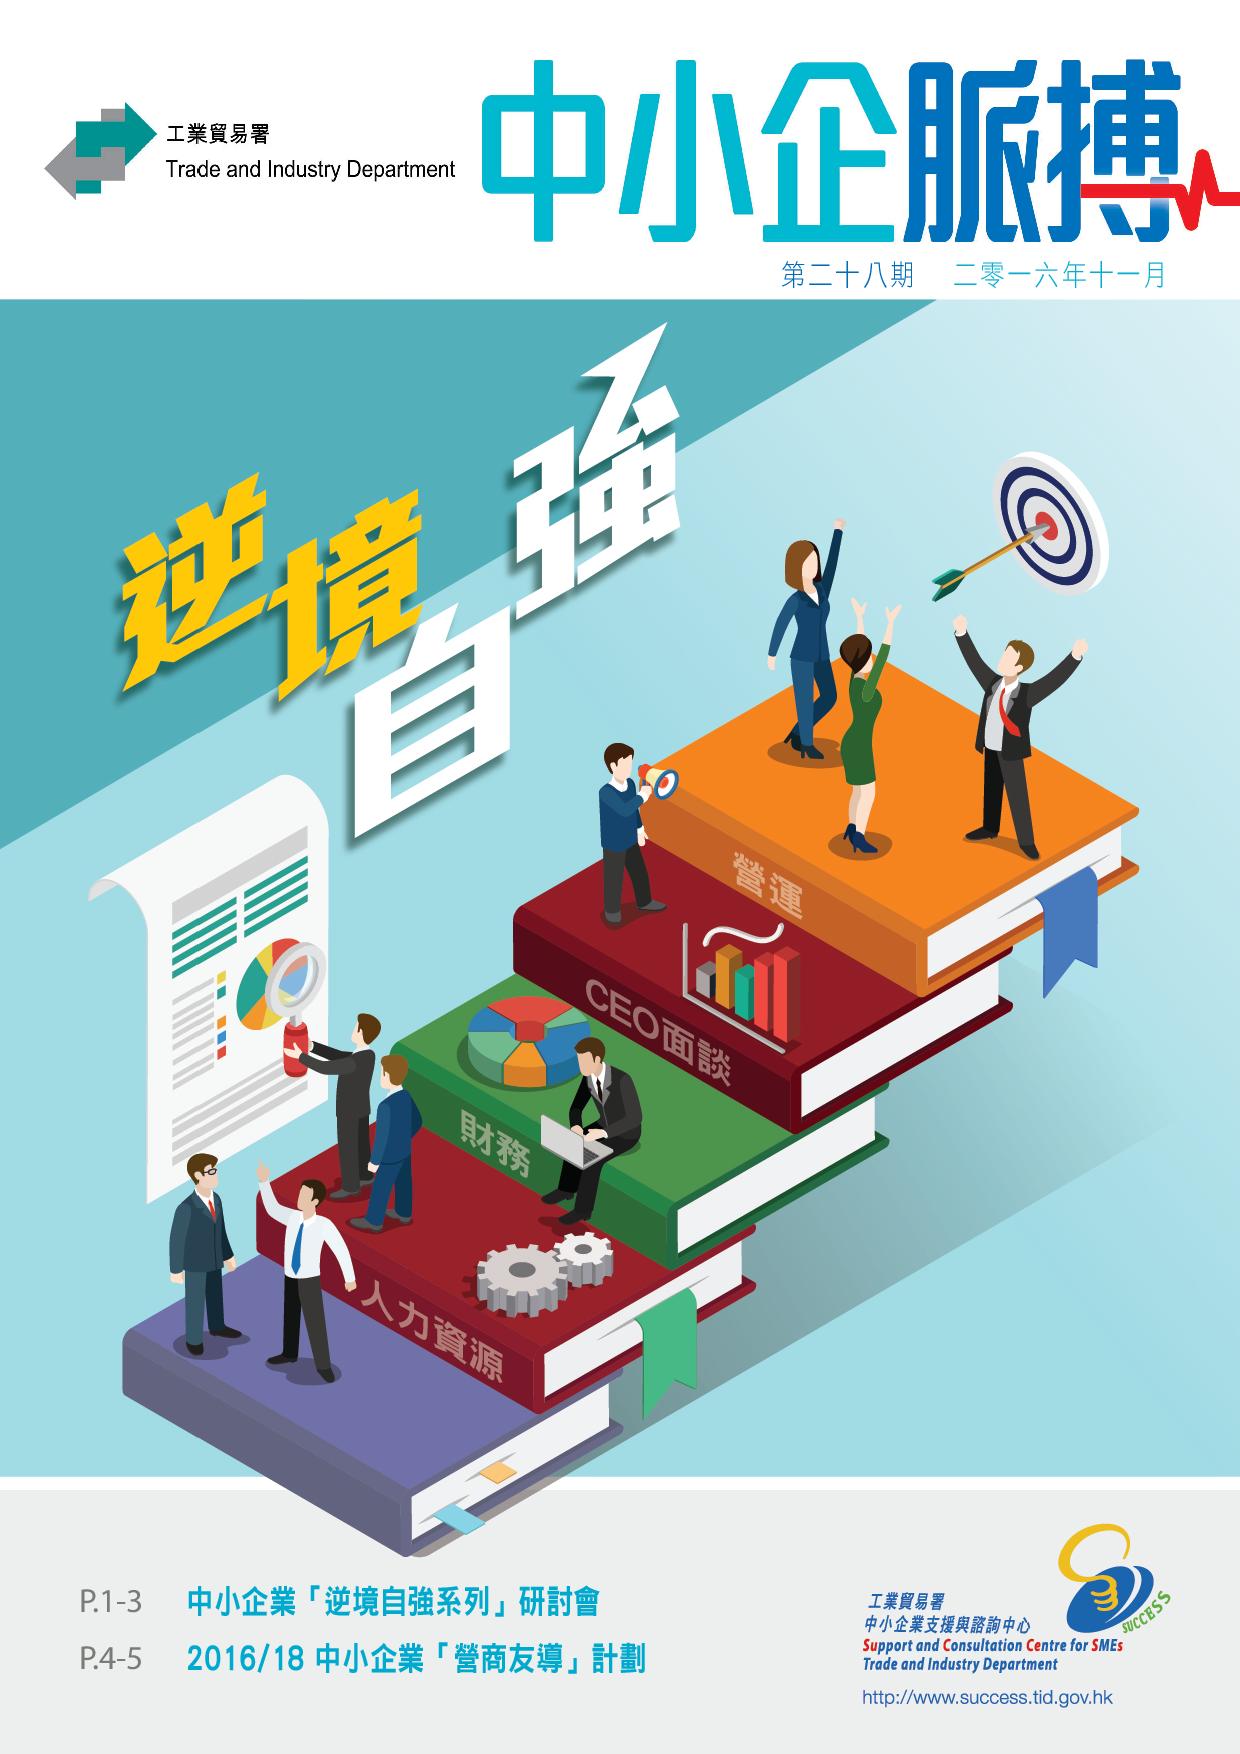 Twenty-Eighth Issue (Nov 2016) (Only available in Chinese)